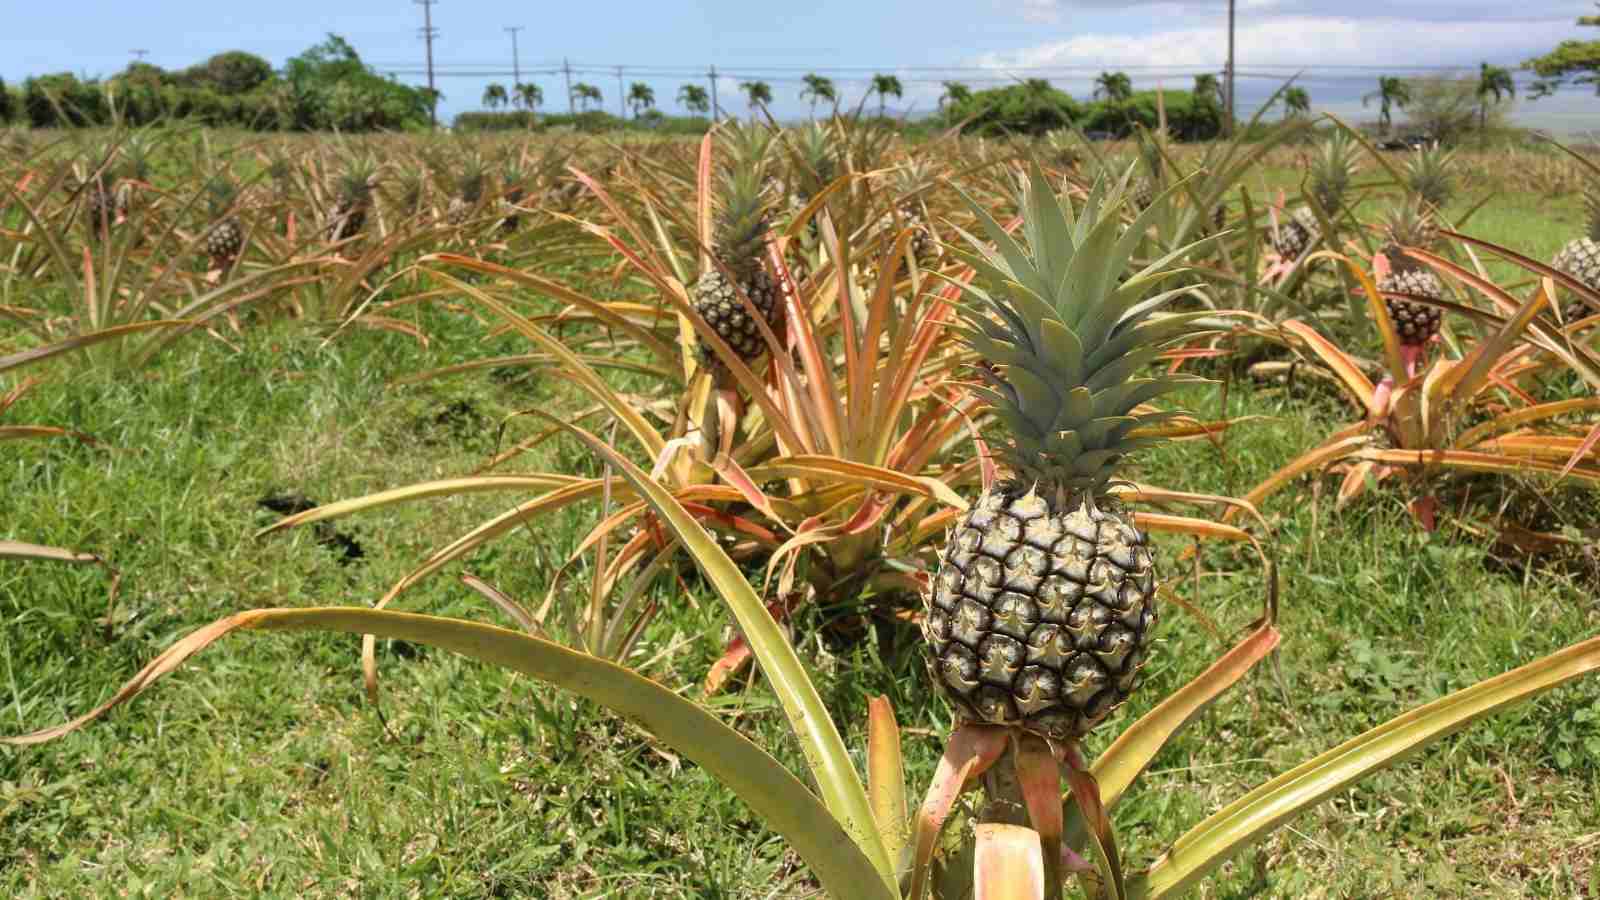 How to plant the pineapples in the soil